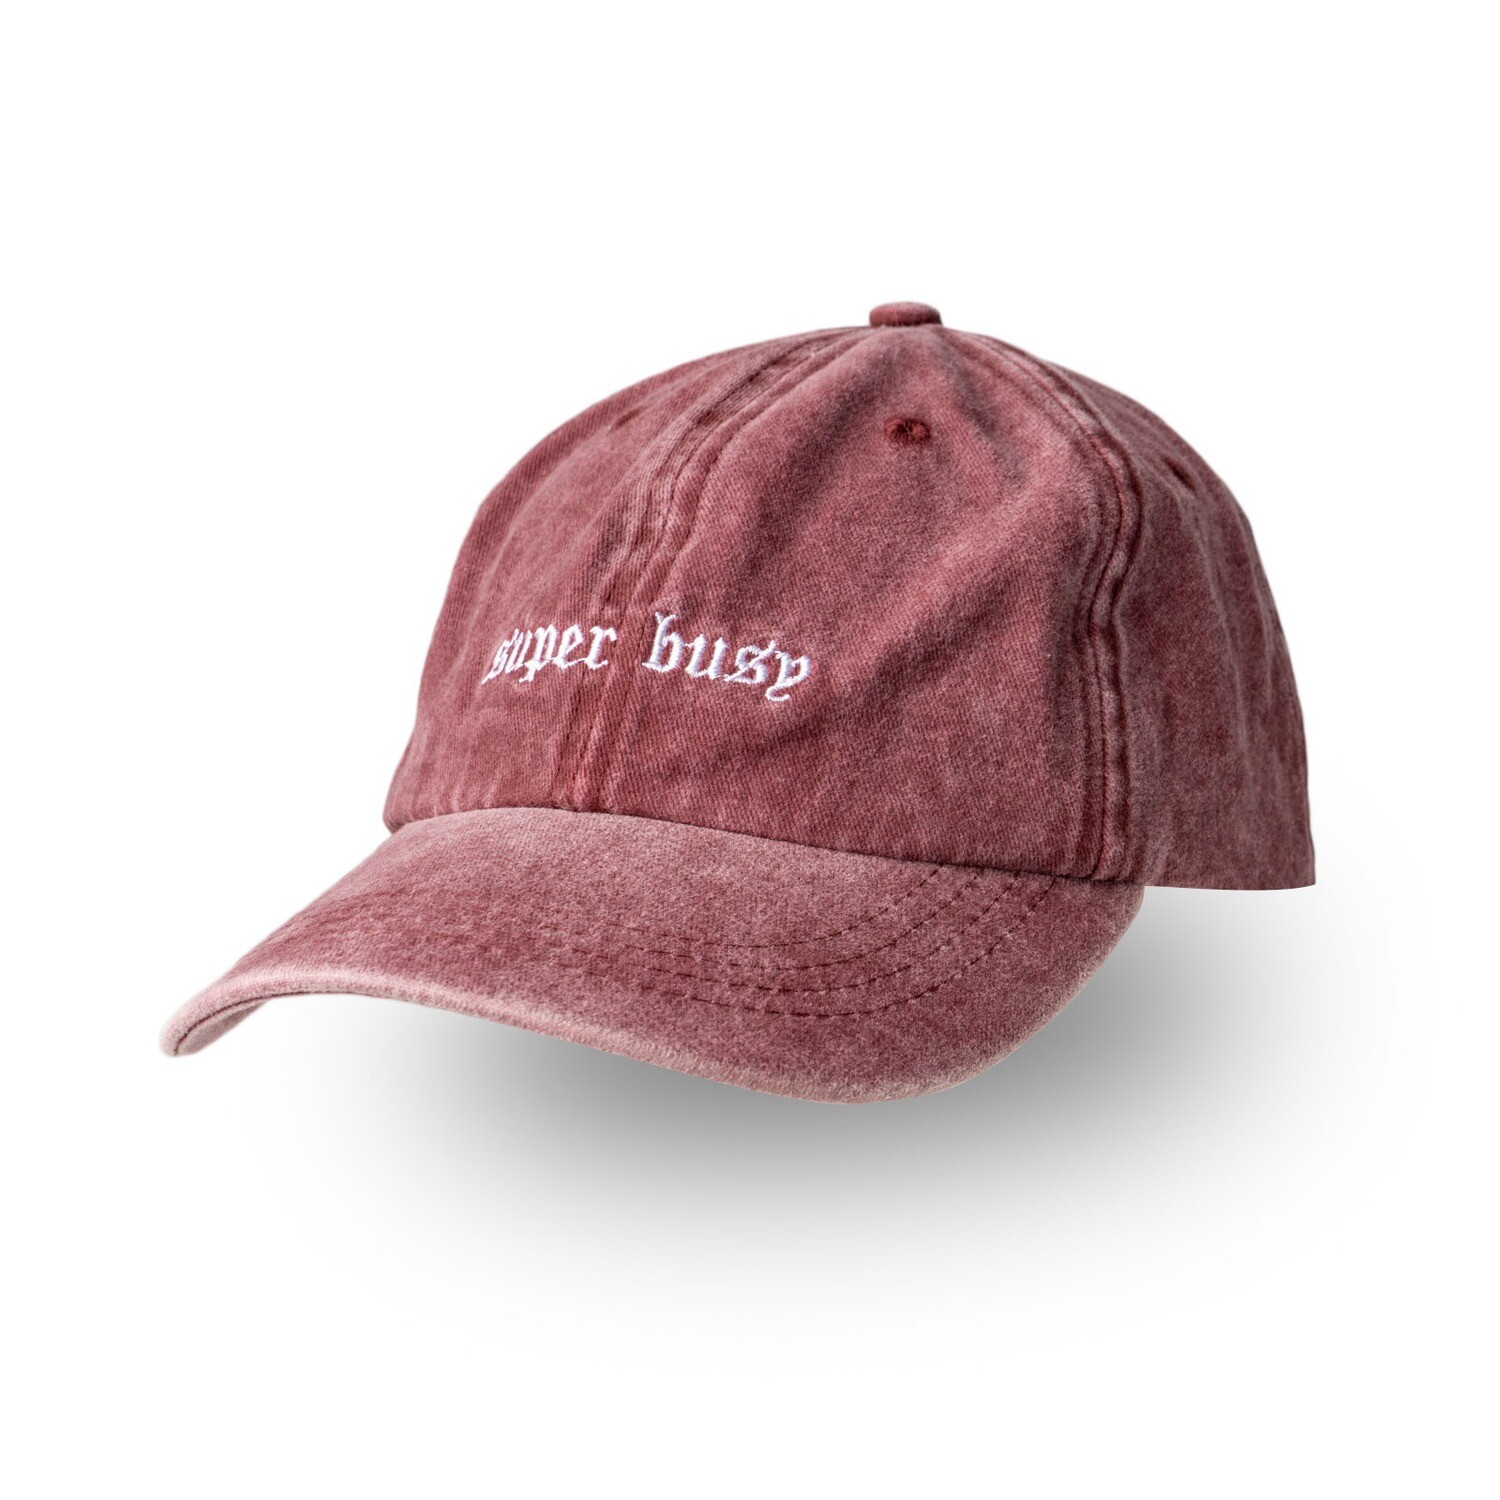 Super Busy Classic Hat